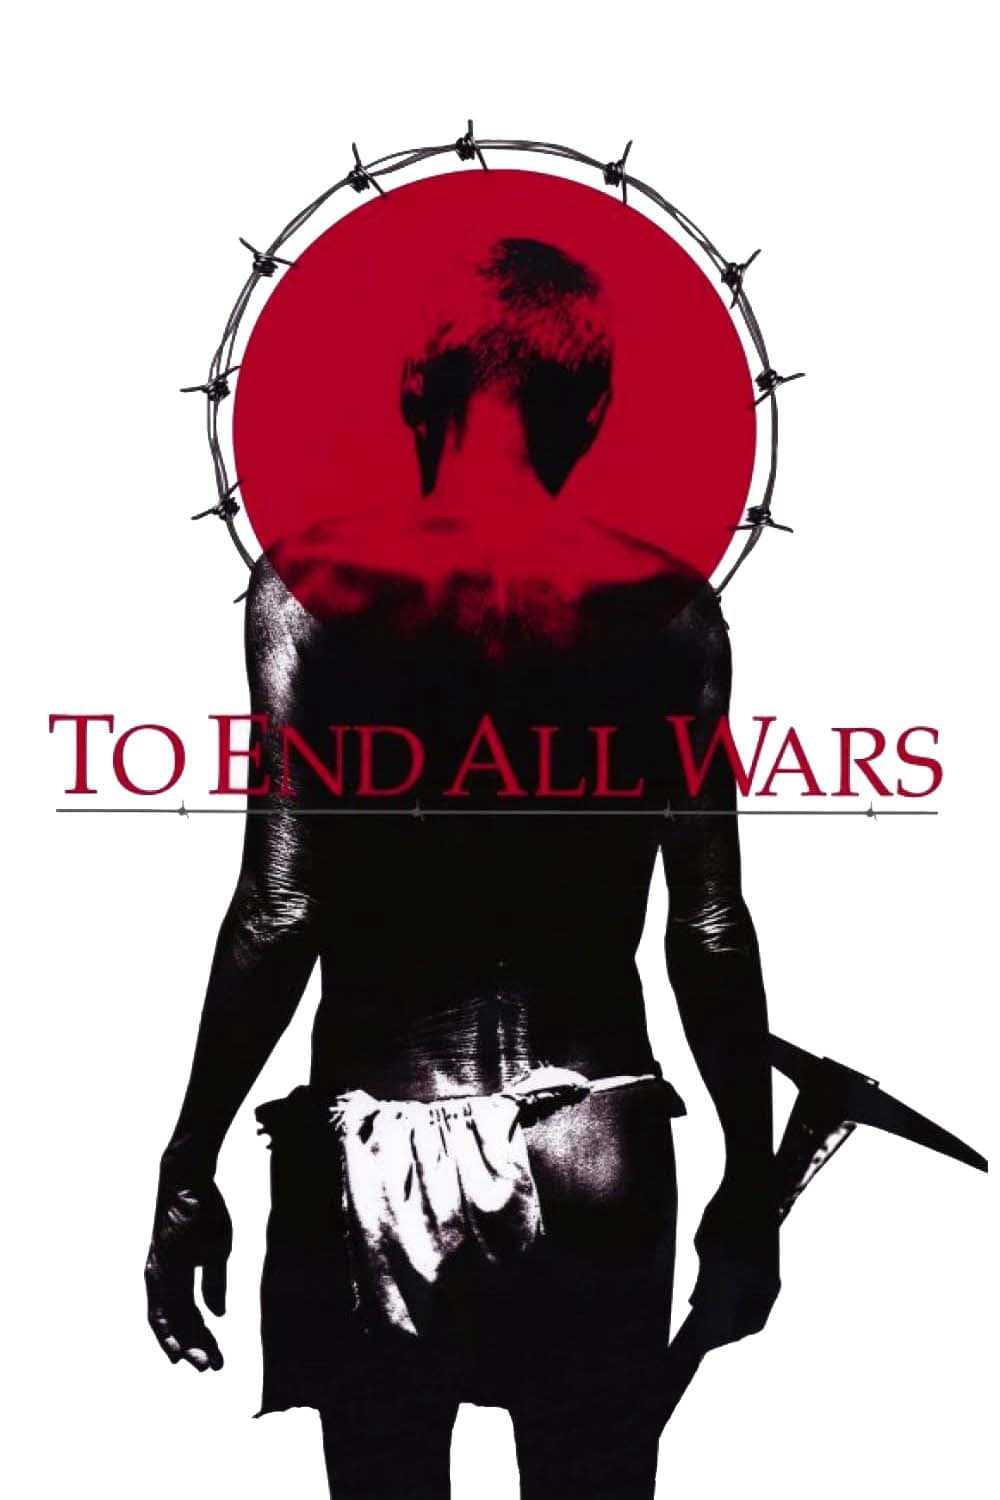 To end all wars - To end all wars